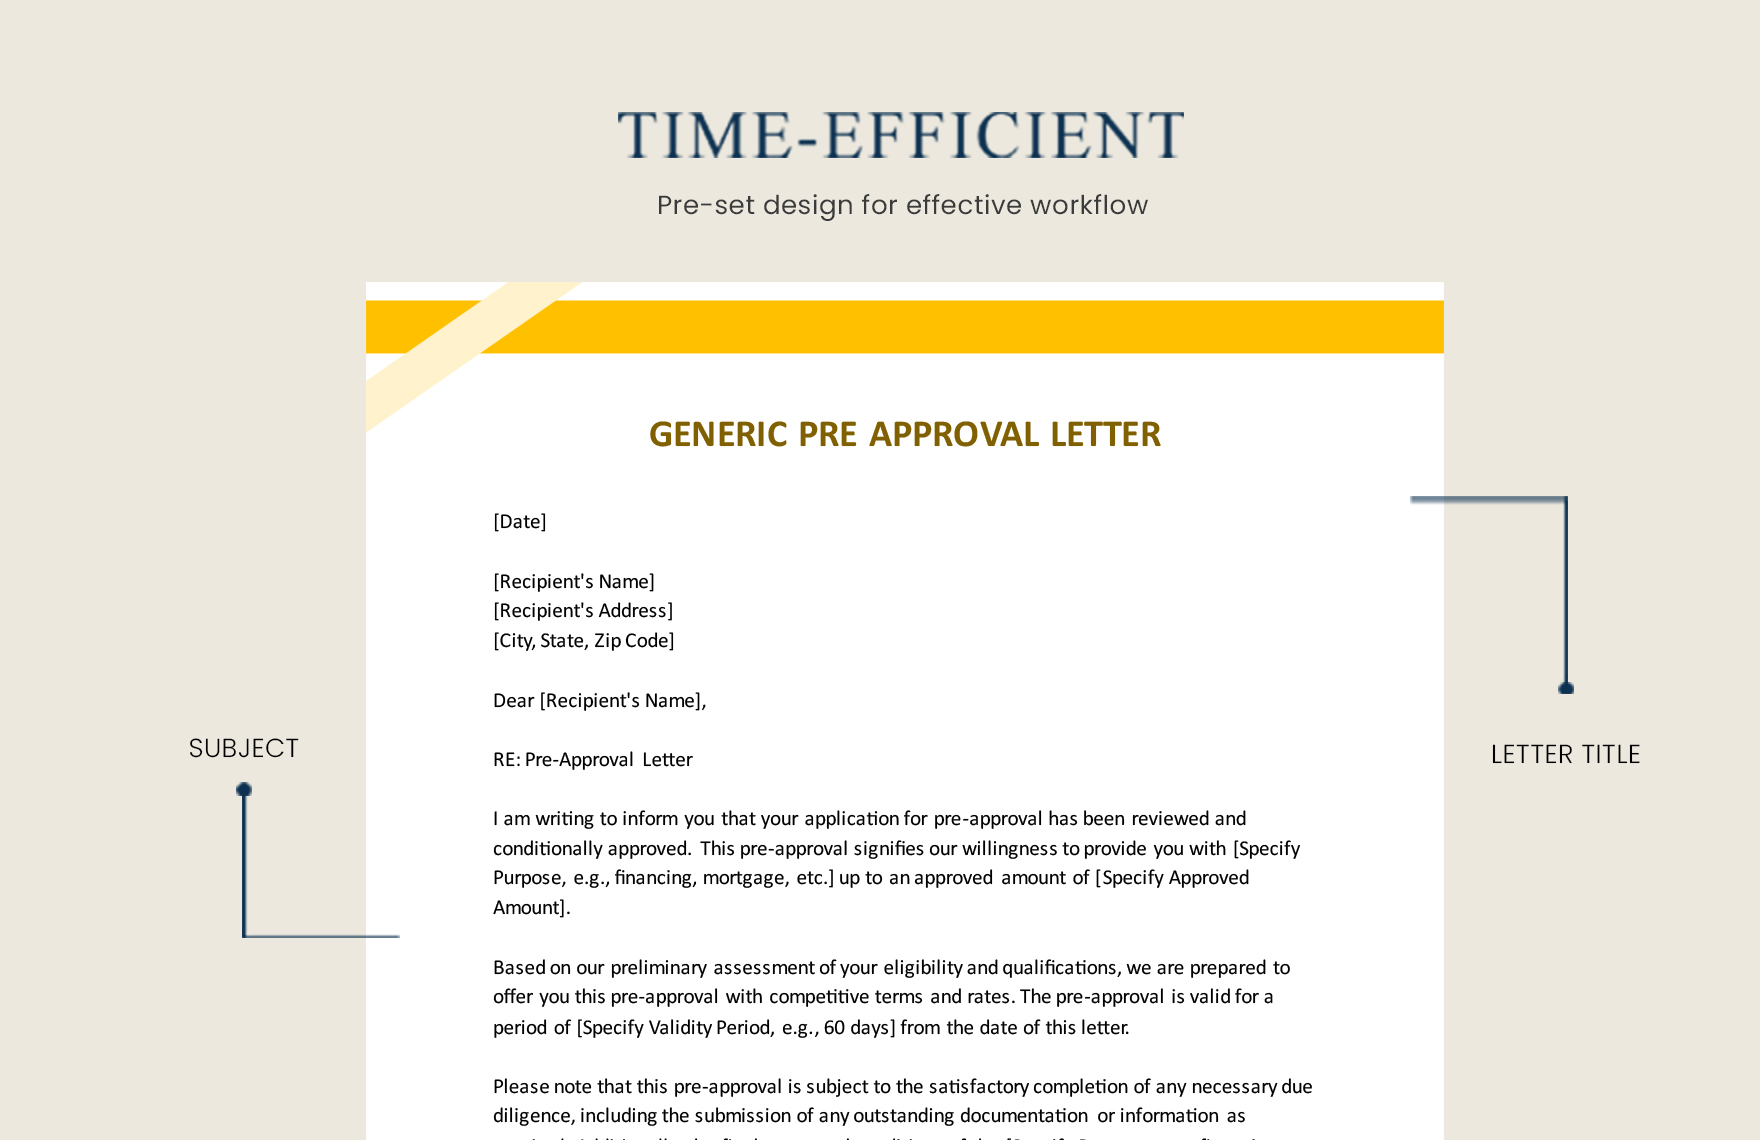 Generic Pre Approval Letter